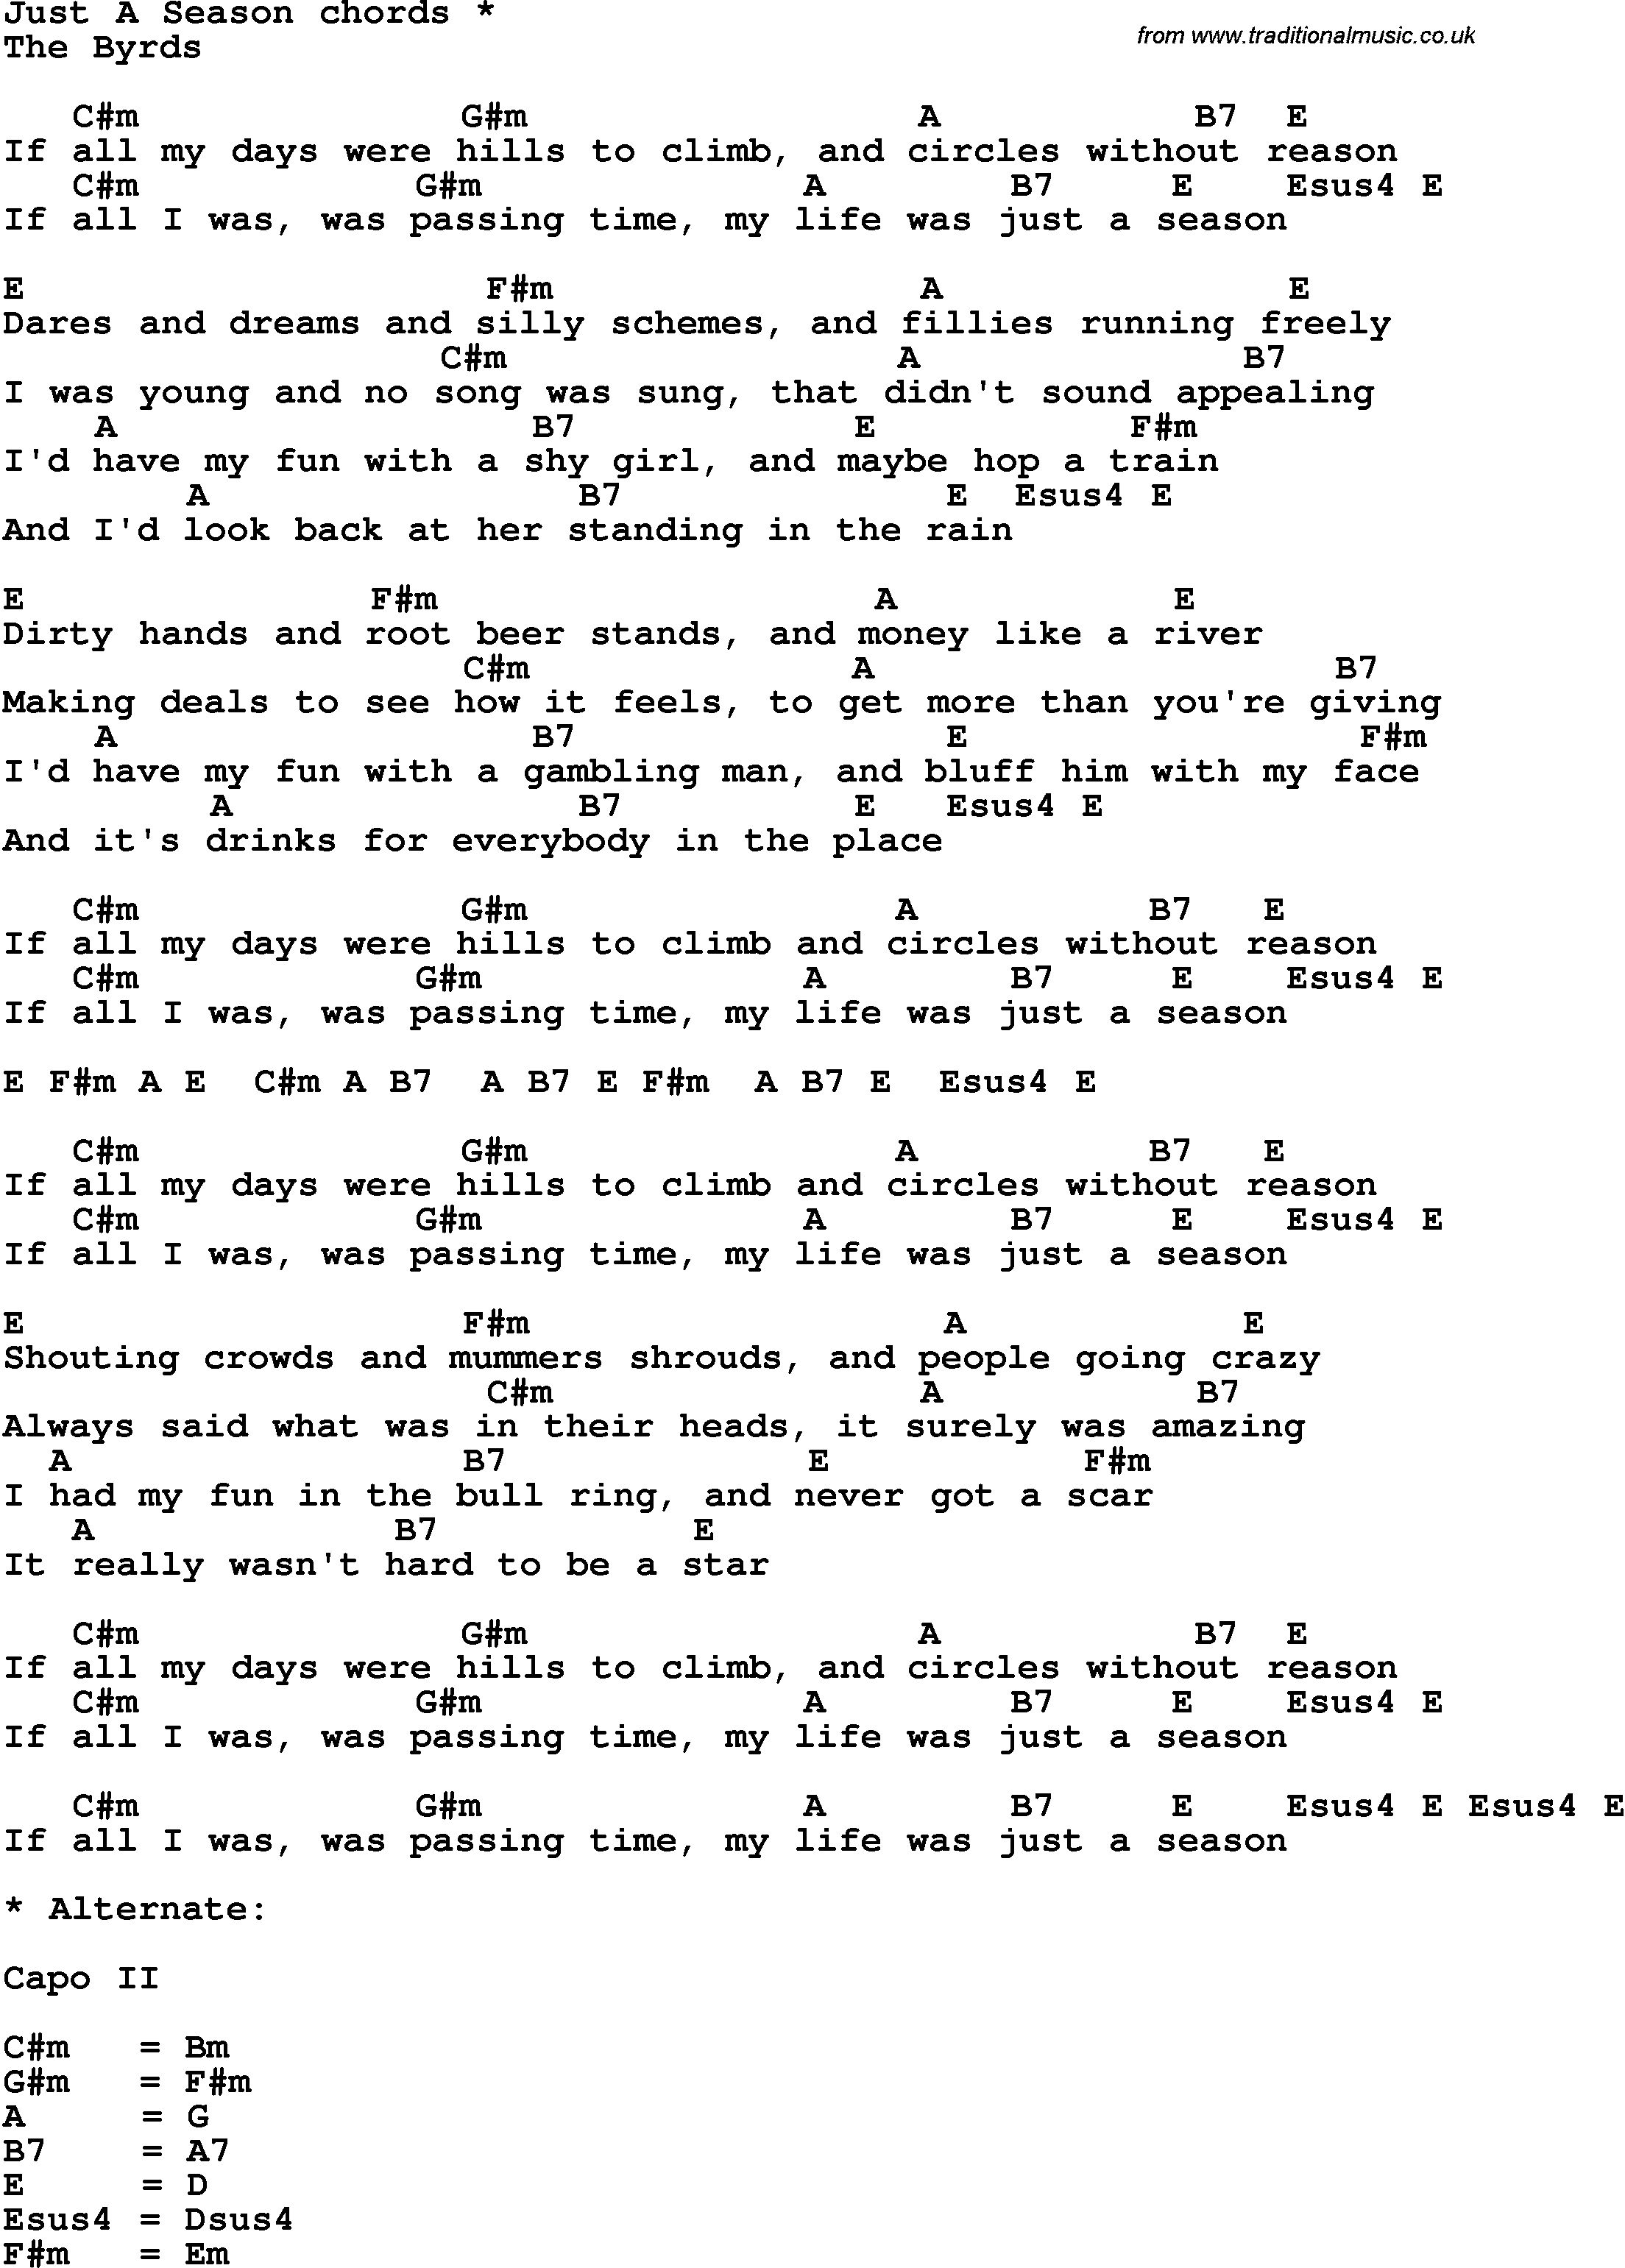 Song Lyrics with guitar chords for Just A Season